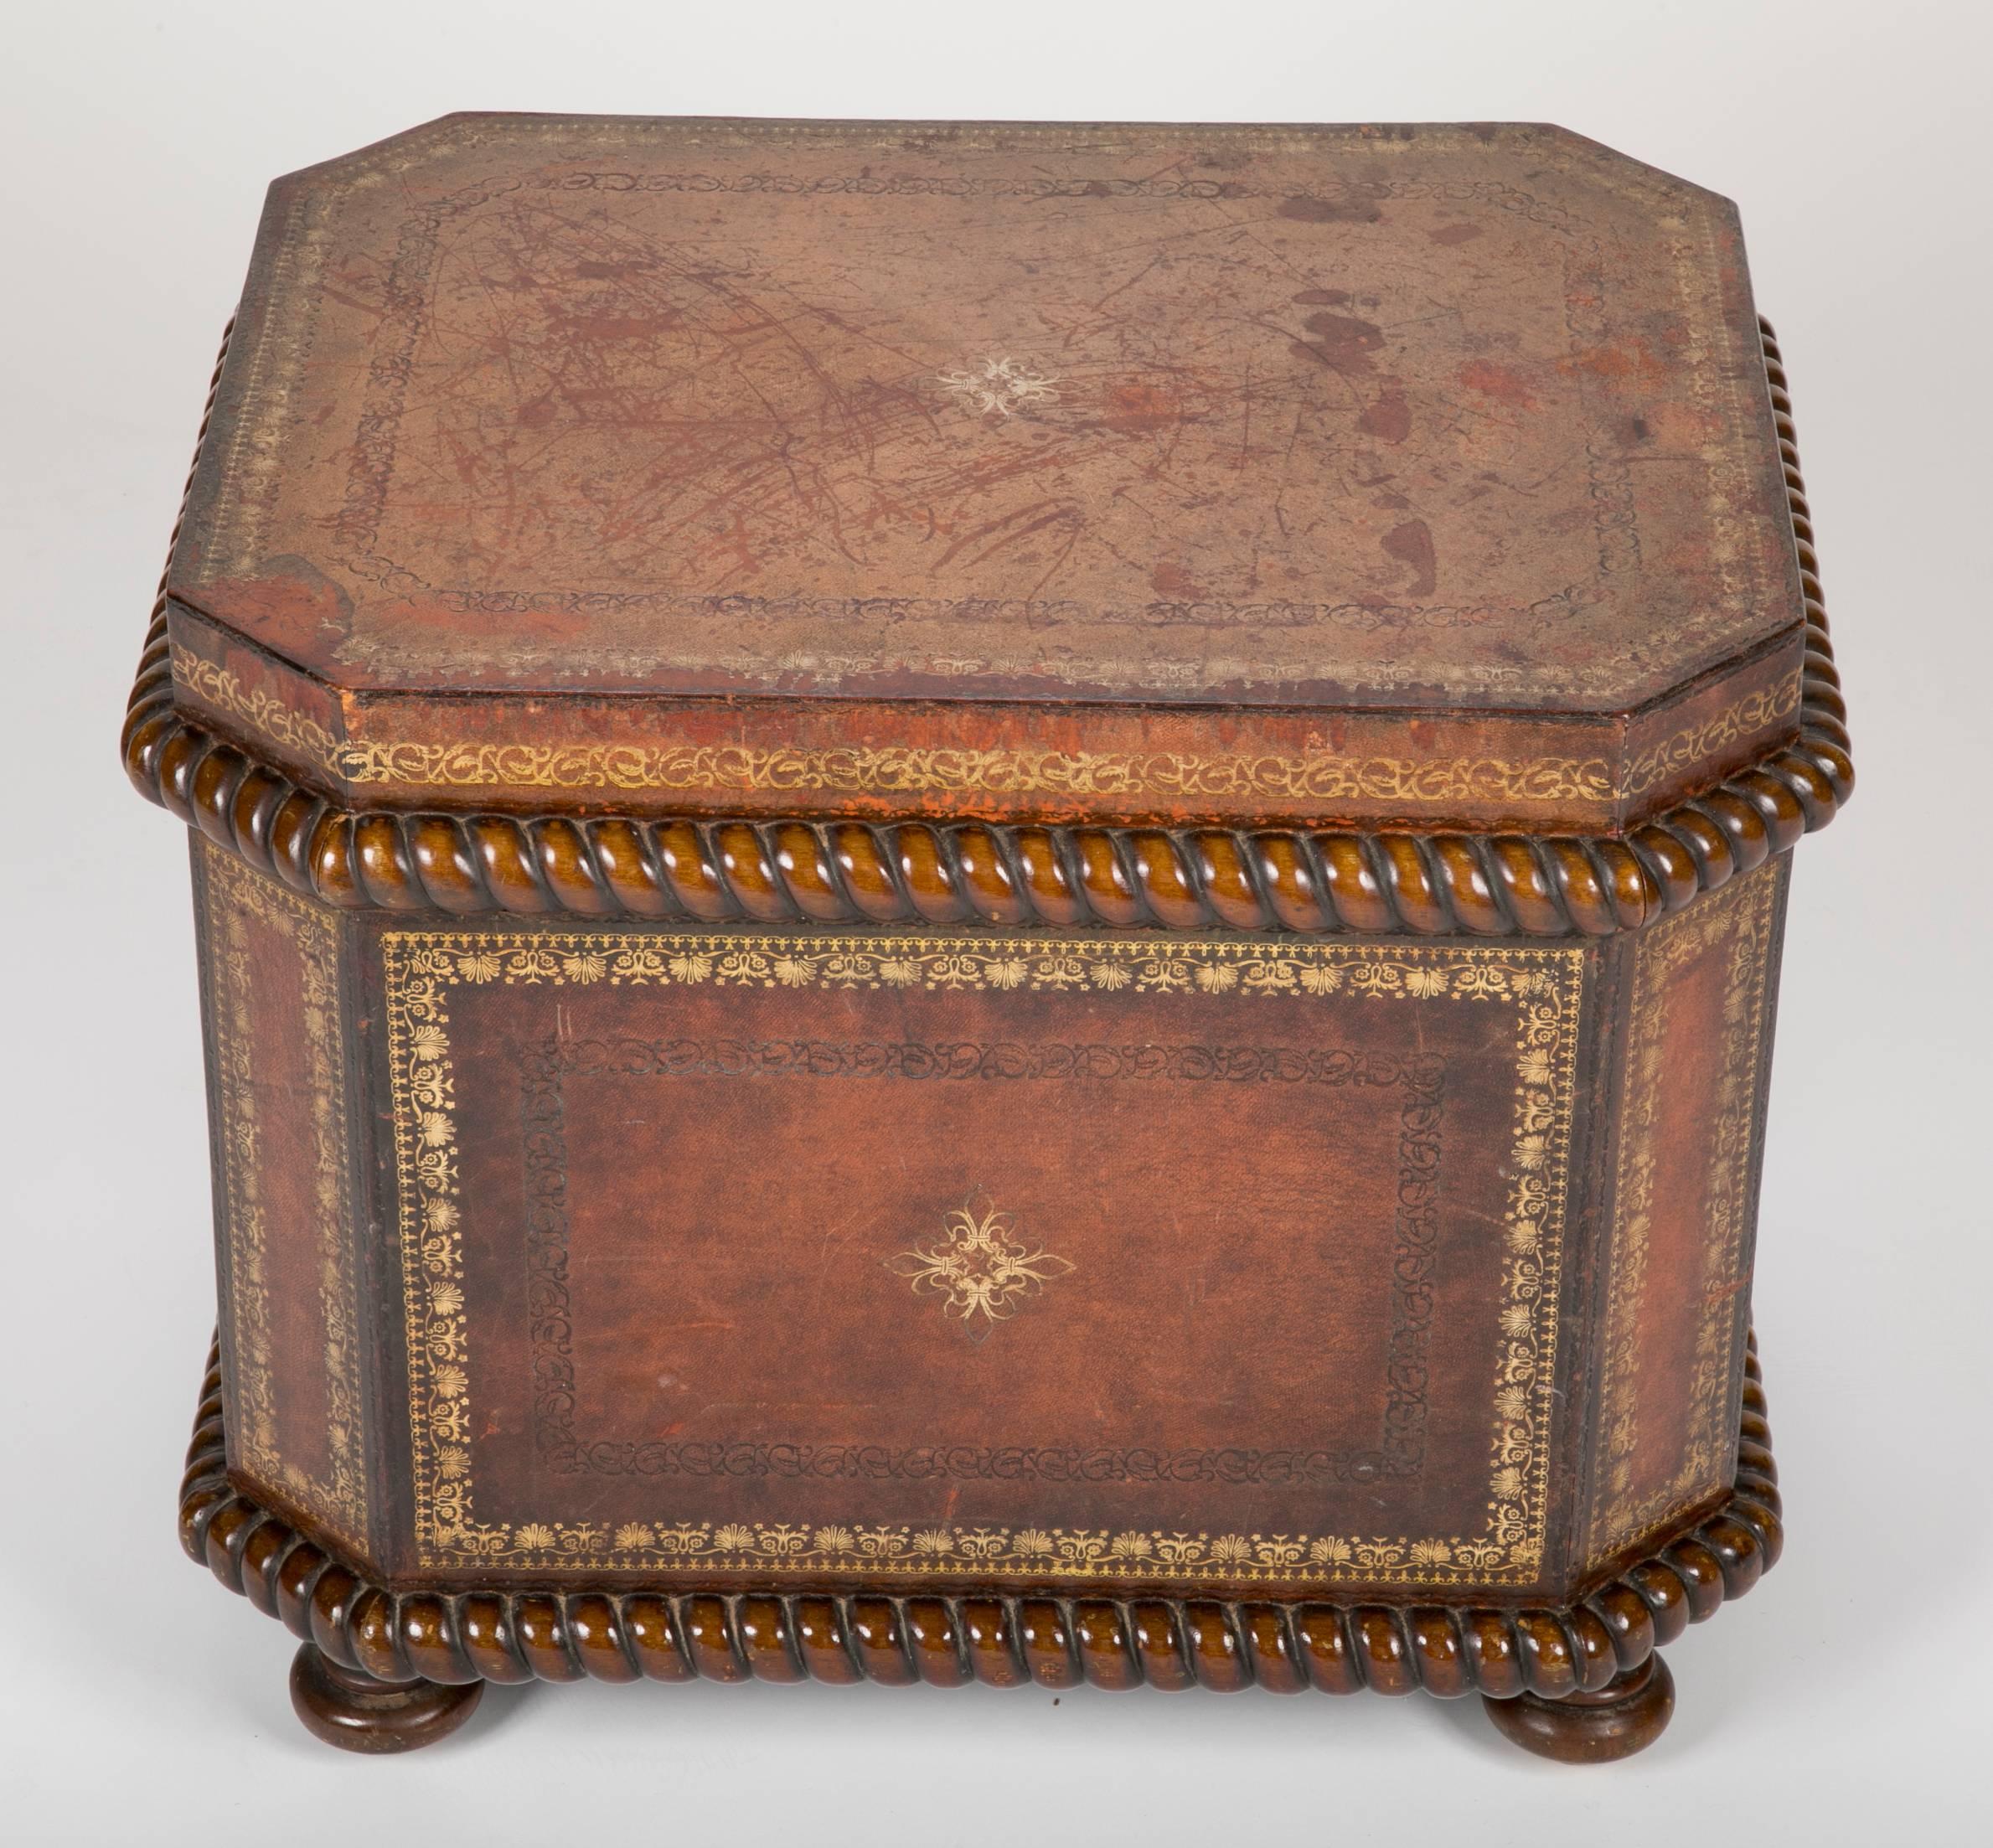 French leather and walnut chest or ottoman, with tooled and gilt decoration. The interior lined with faux marble paper. The leather surface distressed throughout adding a real charm to this handsome piece.